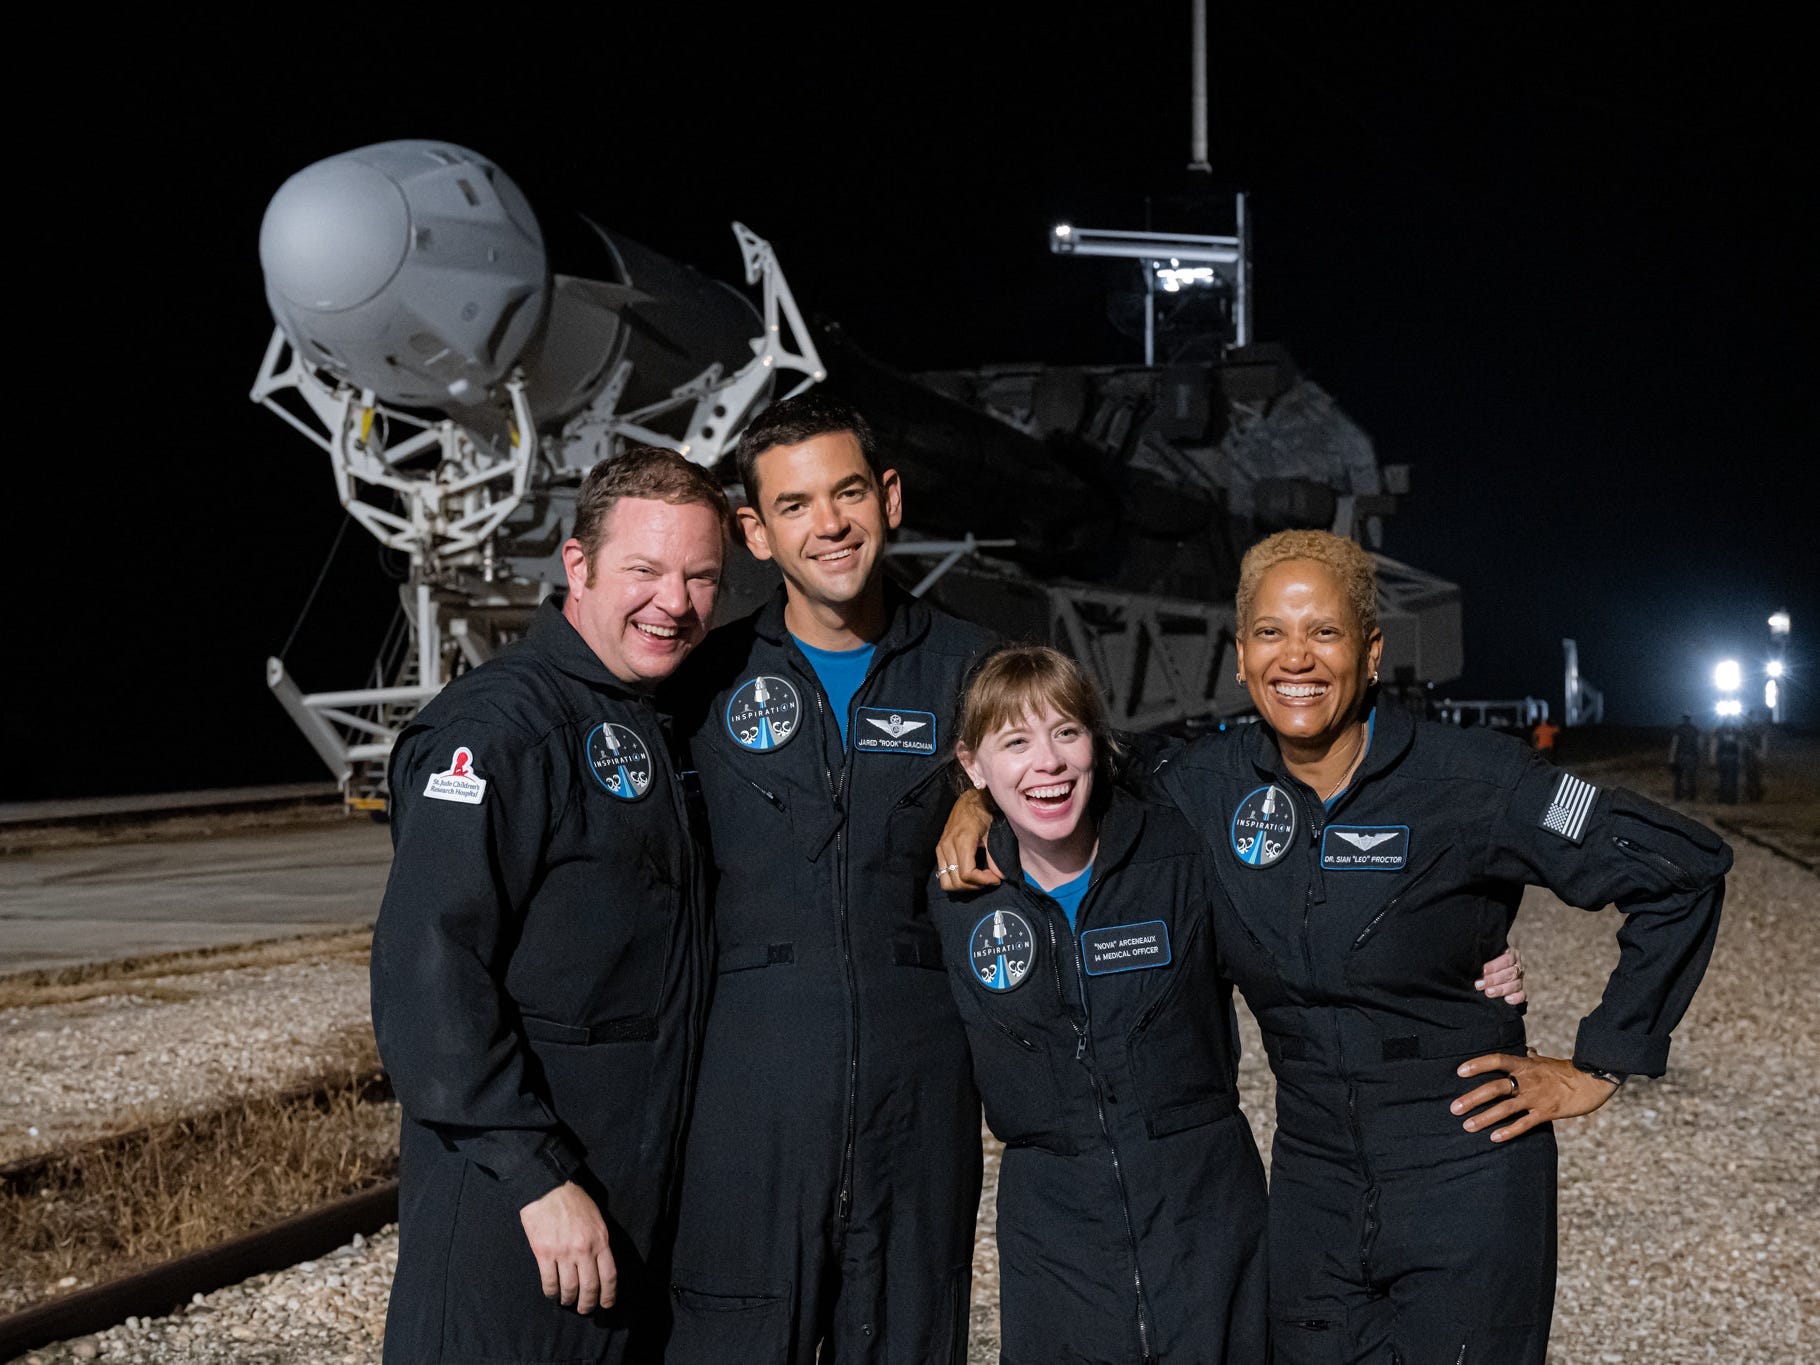 inspiration4 crew poses in front of falcon 9 rocket that's laying sideways on runway at night